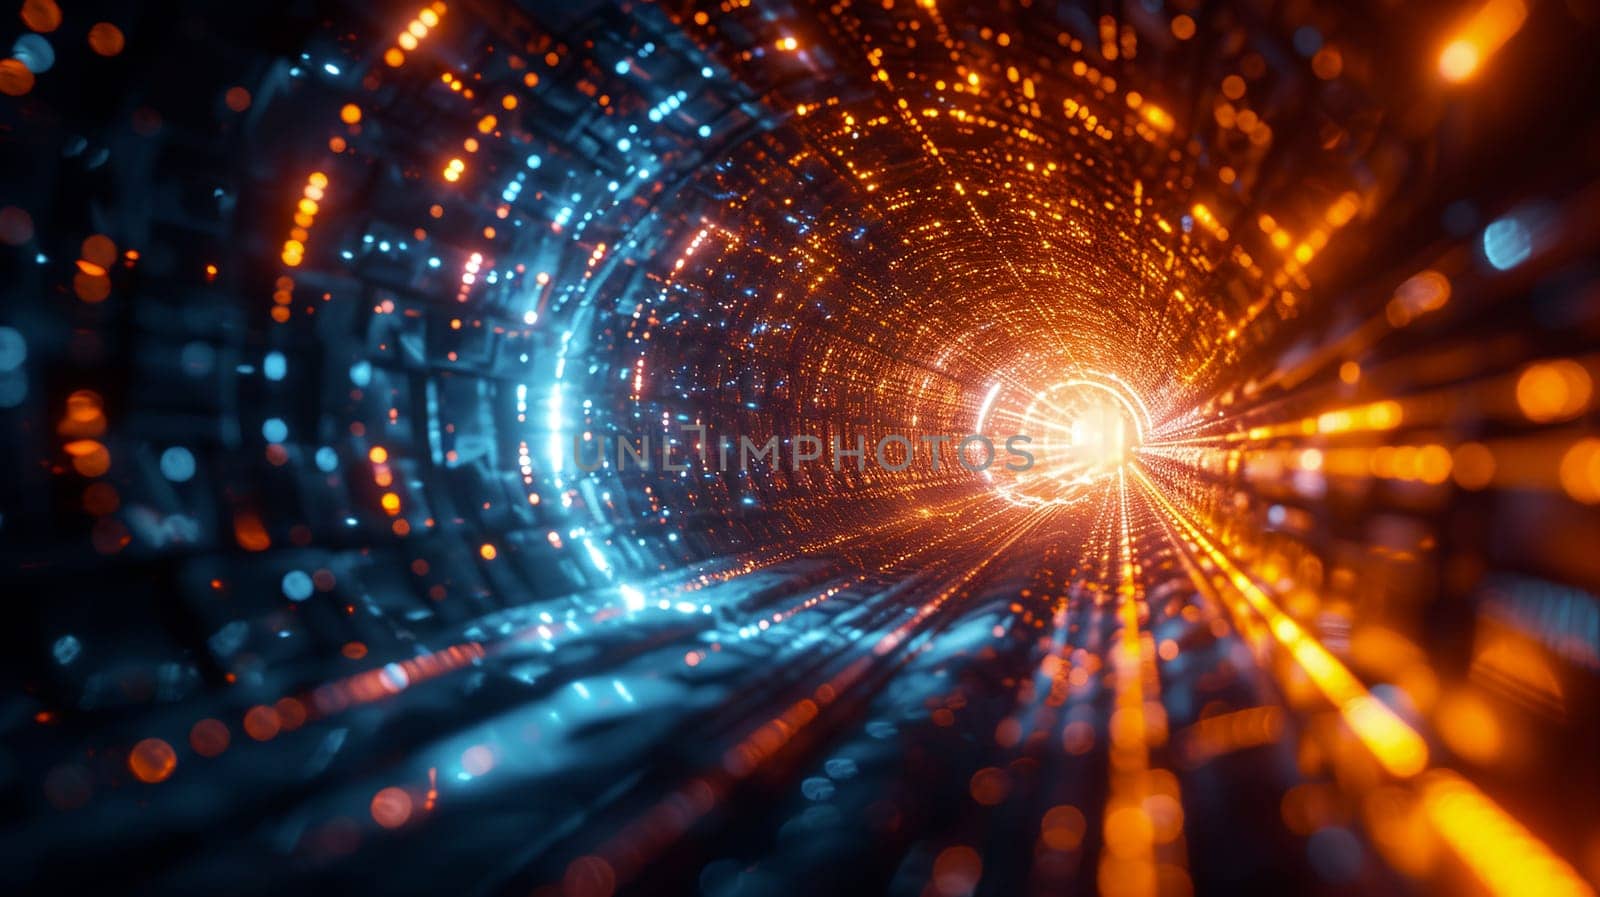 Abstract Light Tunnel Visualization With Vibrant Bokeh Effects by chrisroll